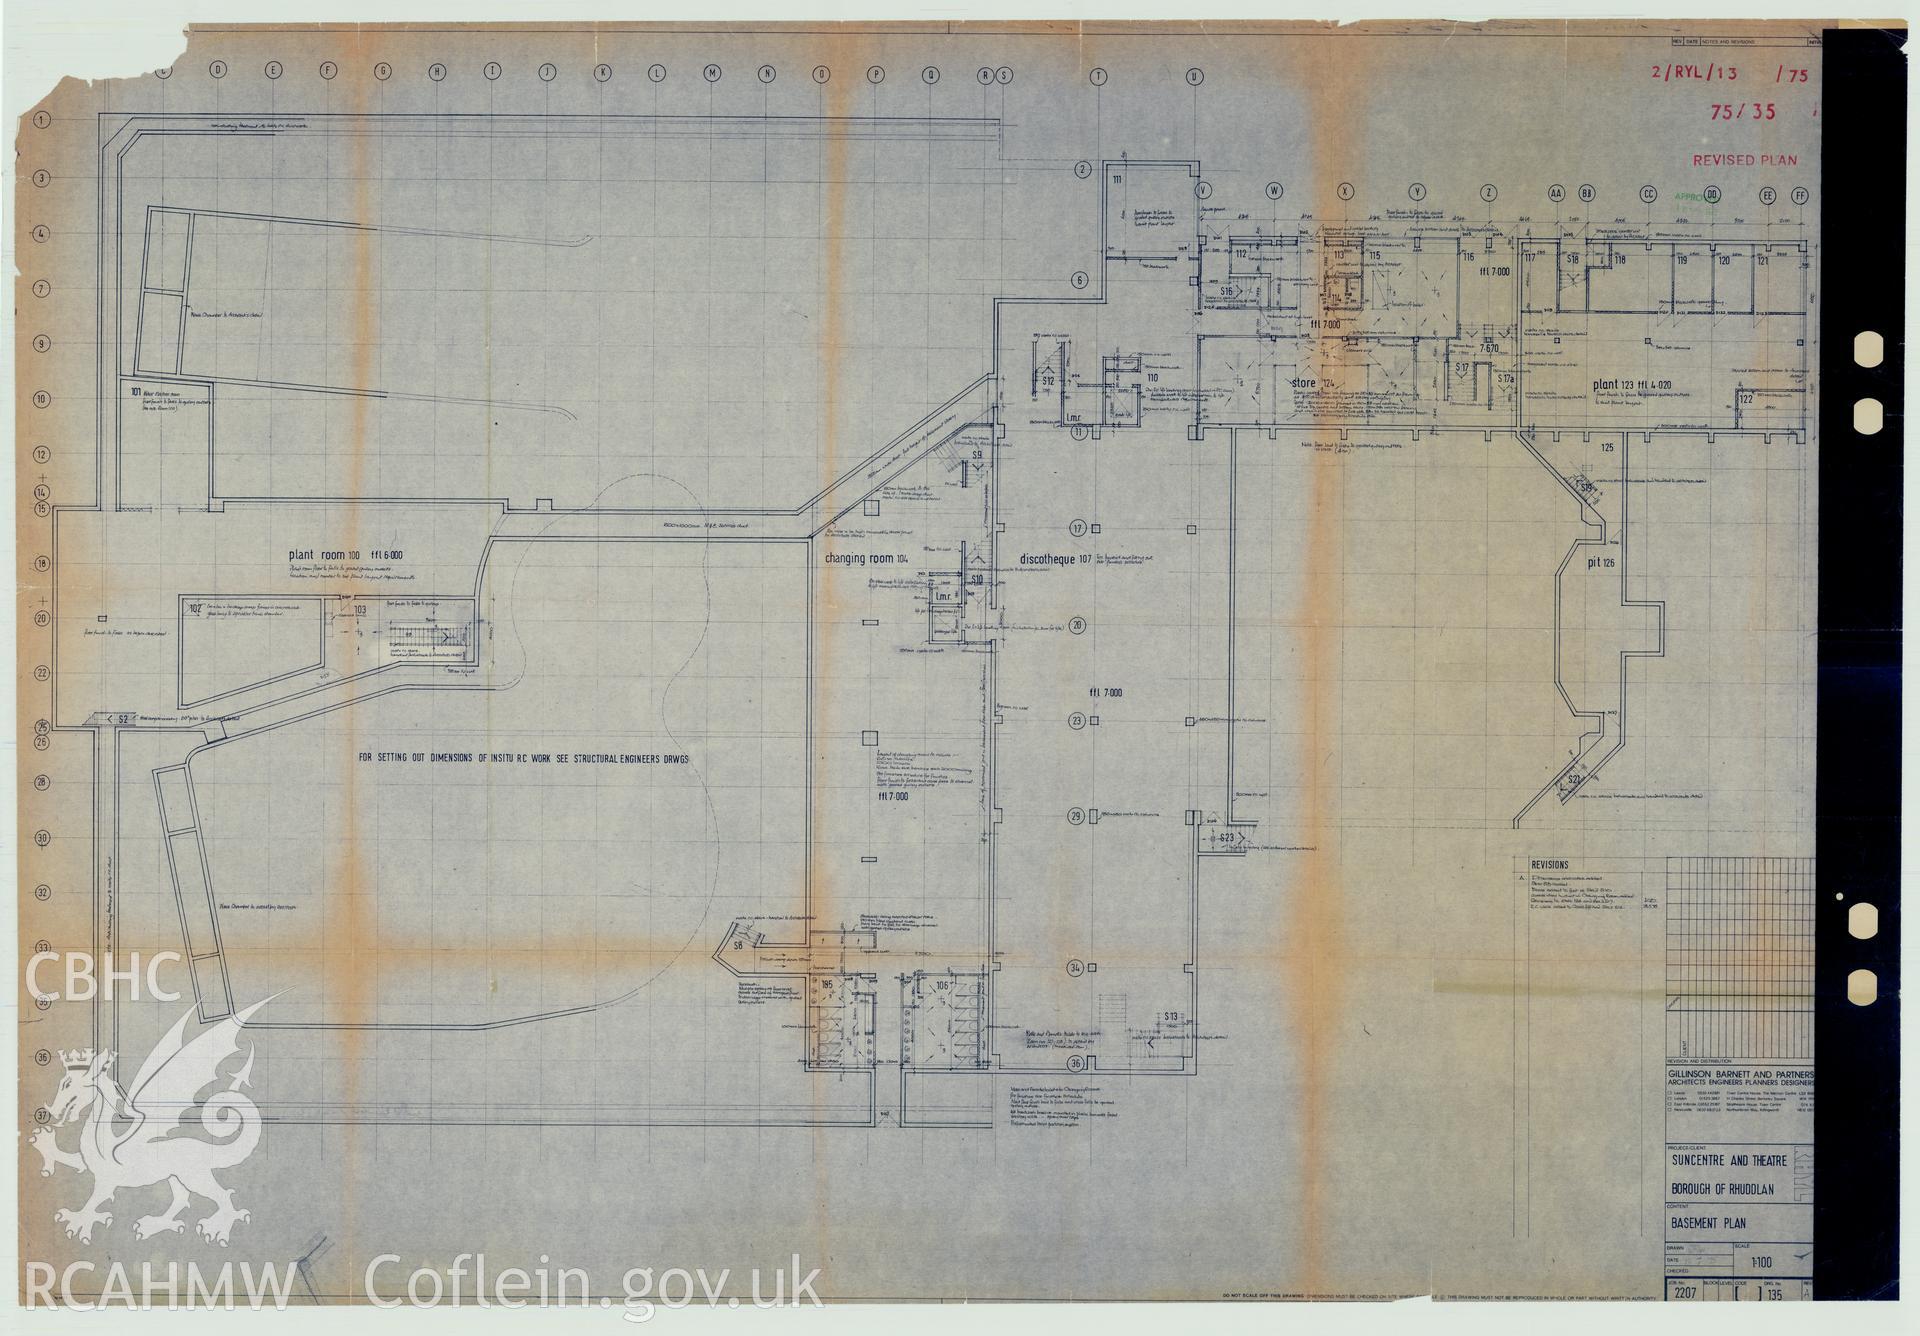 Digital copy of a measured drawing showing basement plan of Rhyl Sun Centre and Theatre, produced by Gillinson Barnett & Partners  1975. Loaned for copying by Denbighshire County Council.